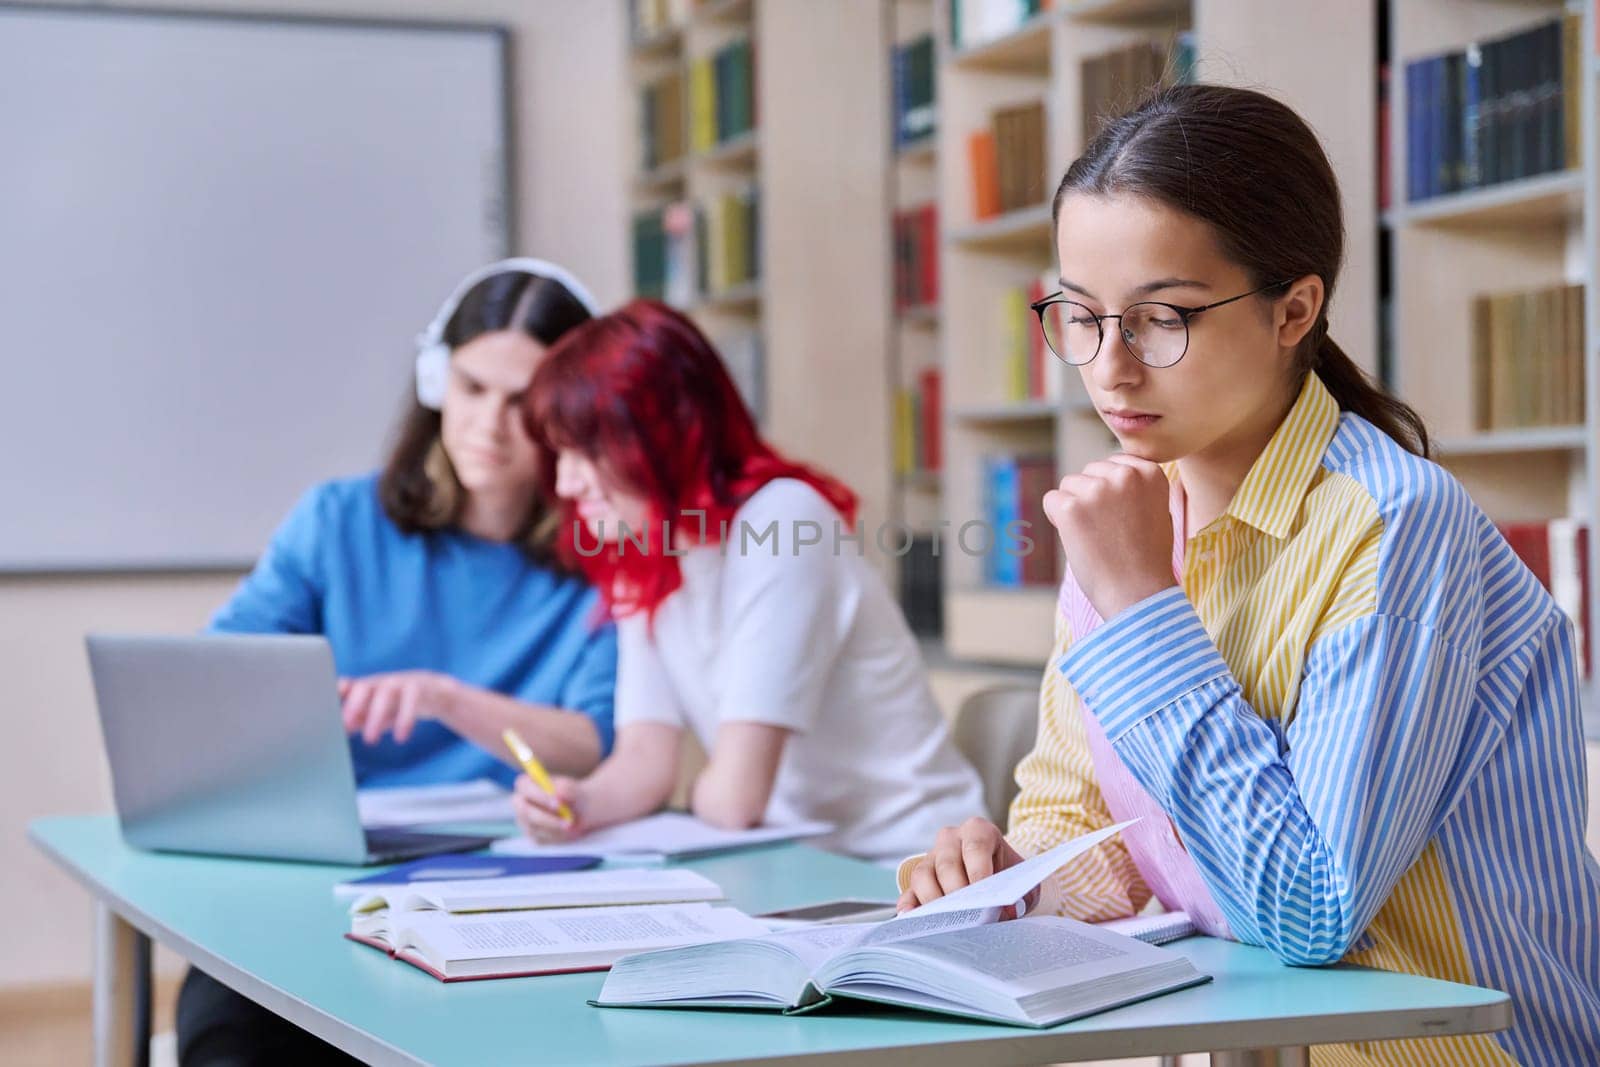 High school students studying in library class, teenage girl in focus. Group of teenagers sitting at desk, writing in notebooks, using laptop books. Knowledge, education, adolescence concept